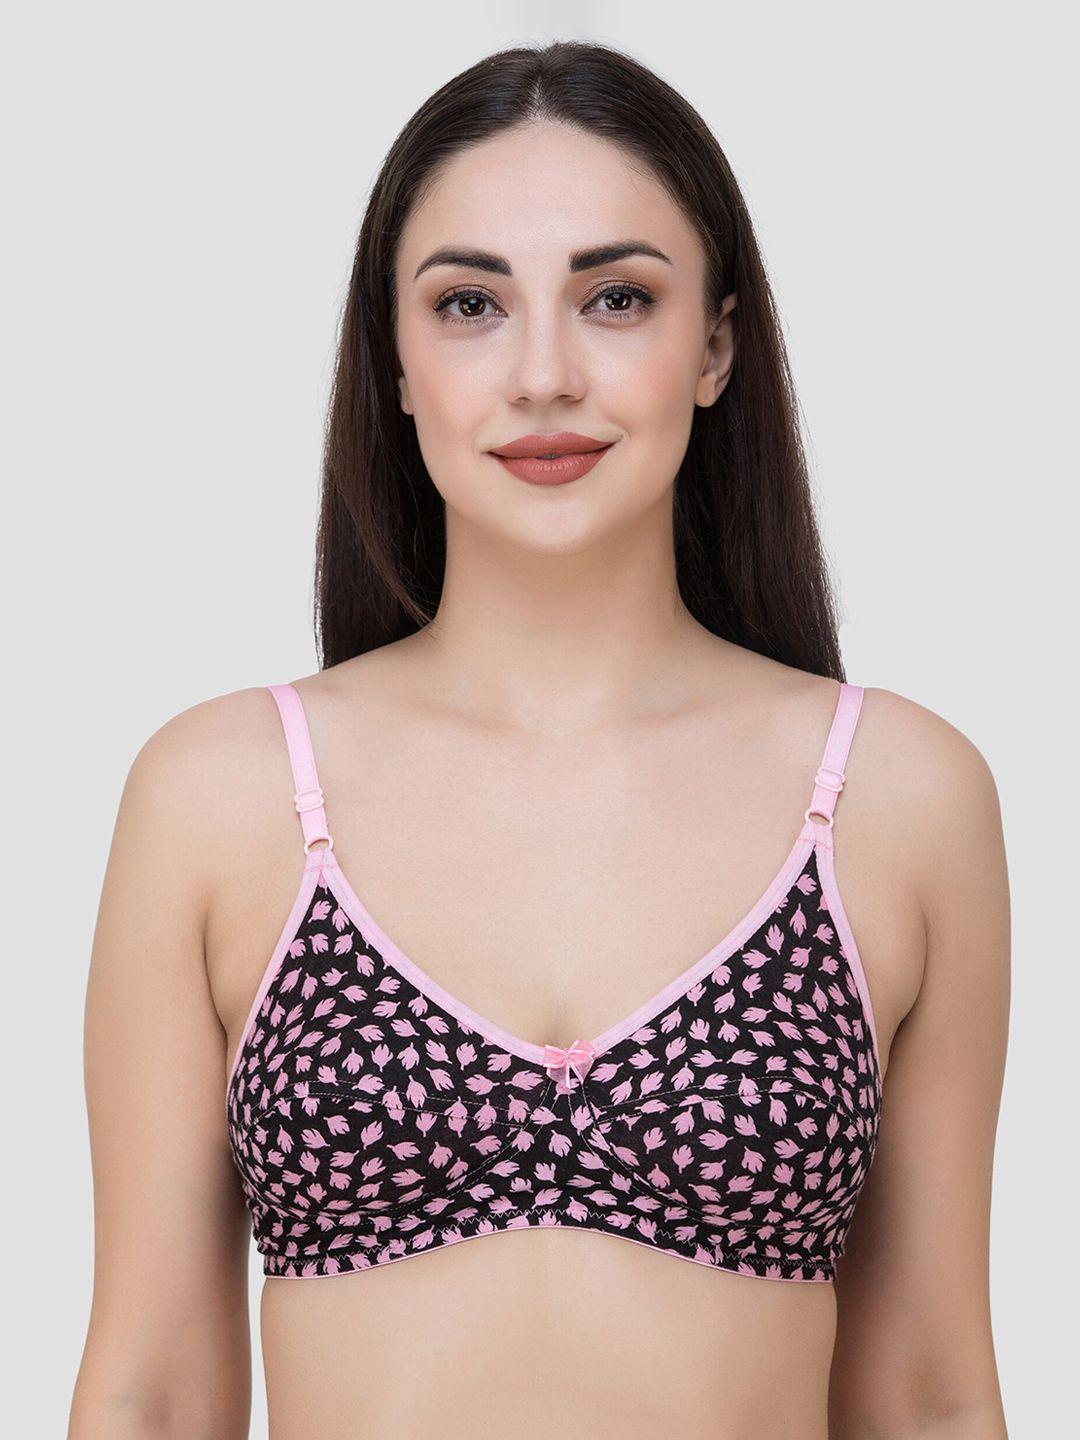 fasense black & pink printed non-wired non-padded everyday bra bv005b